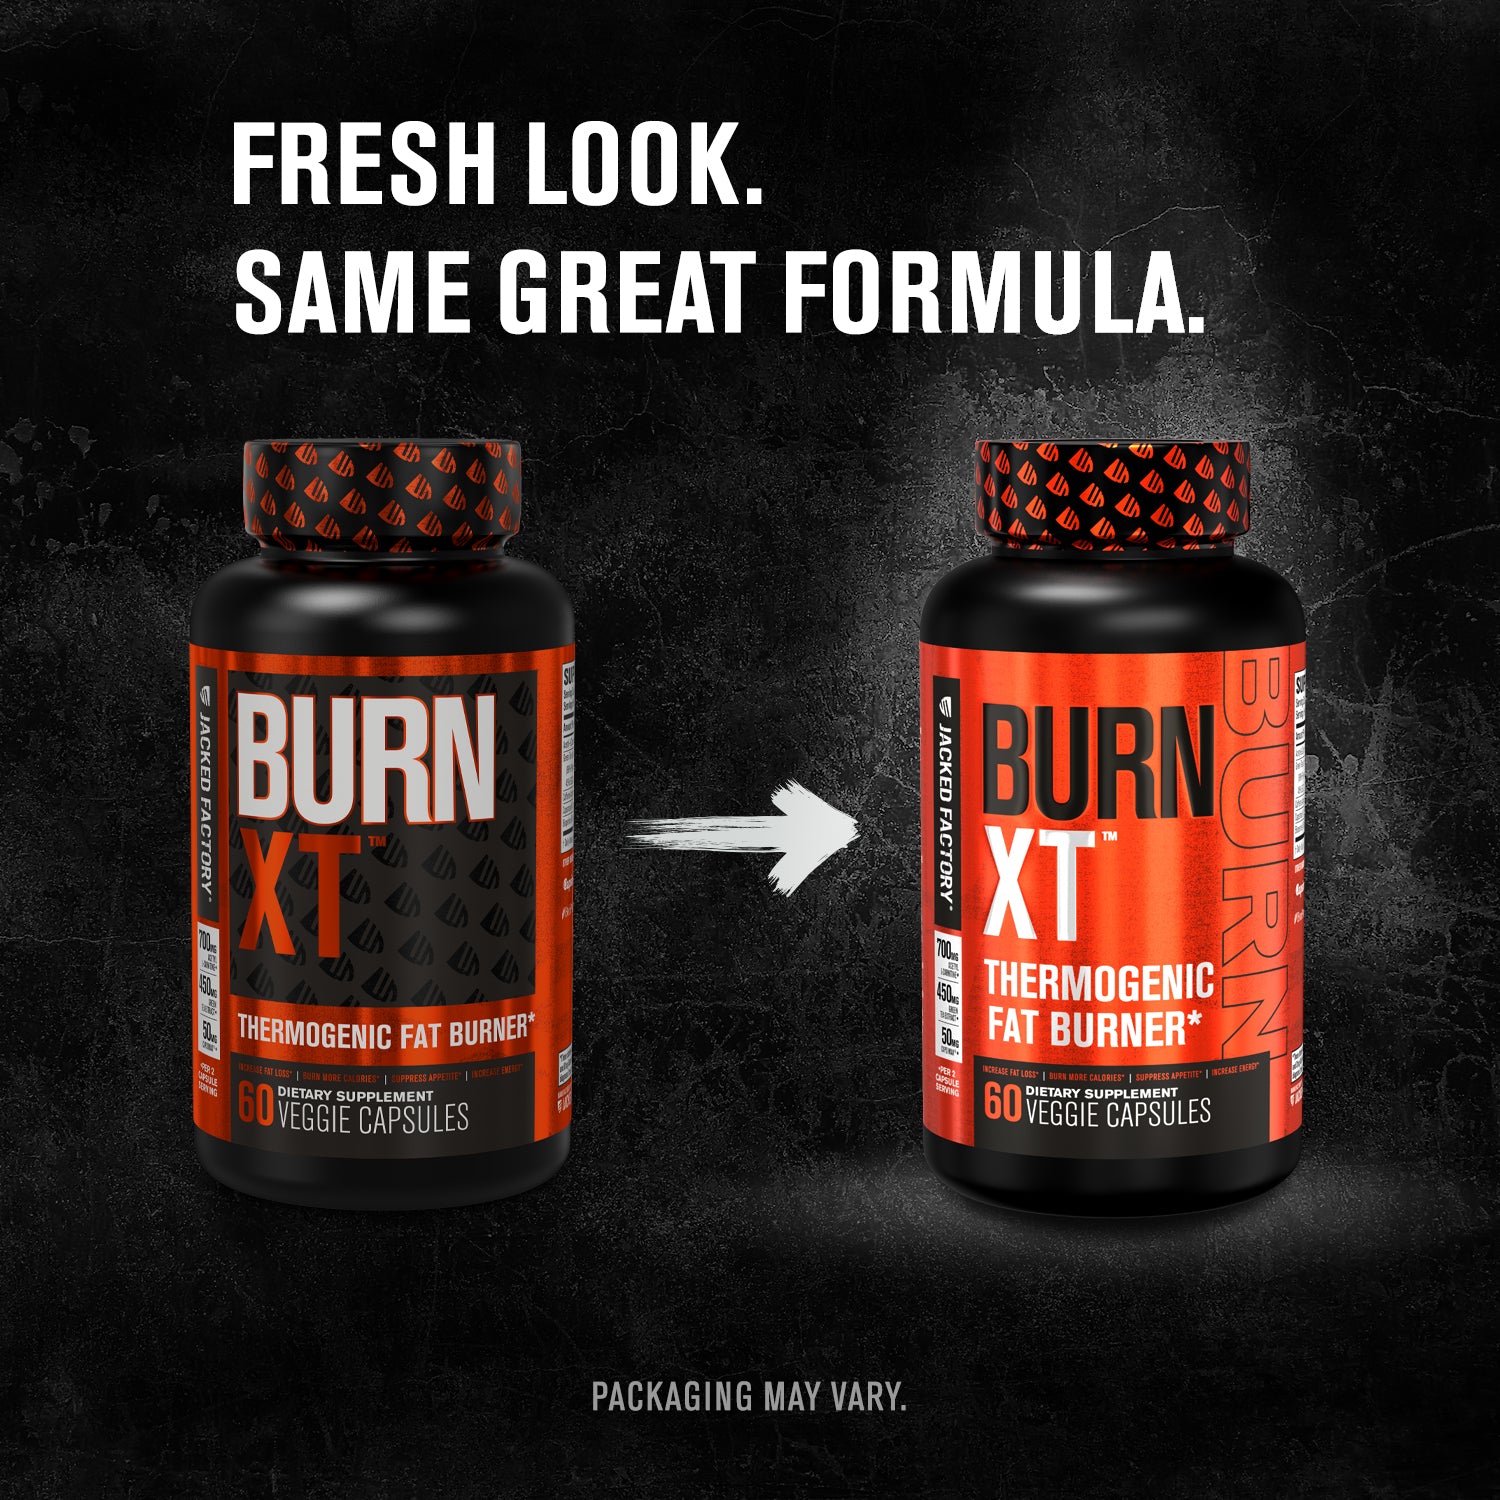 Comparing old Jacked Factory Burn XT label to new Jacked Factory Burn XT label with the text "FRESH NEW LOOK, SAME GREAT FORMULA". Underneath reads "Packaging may vary."